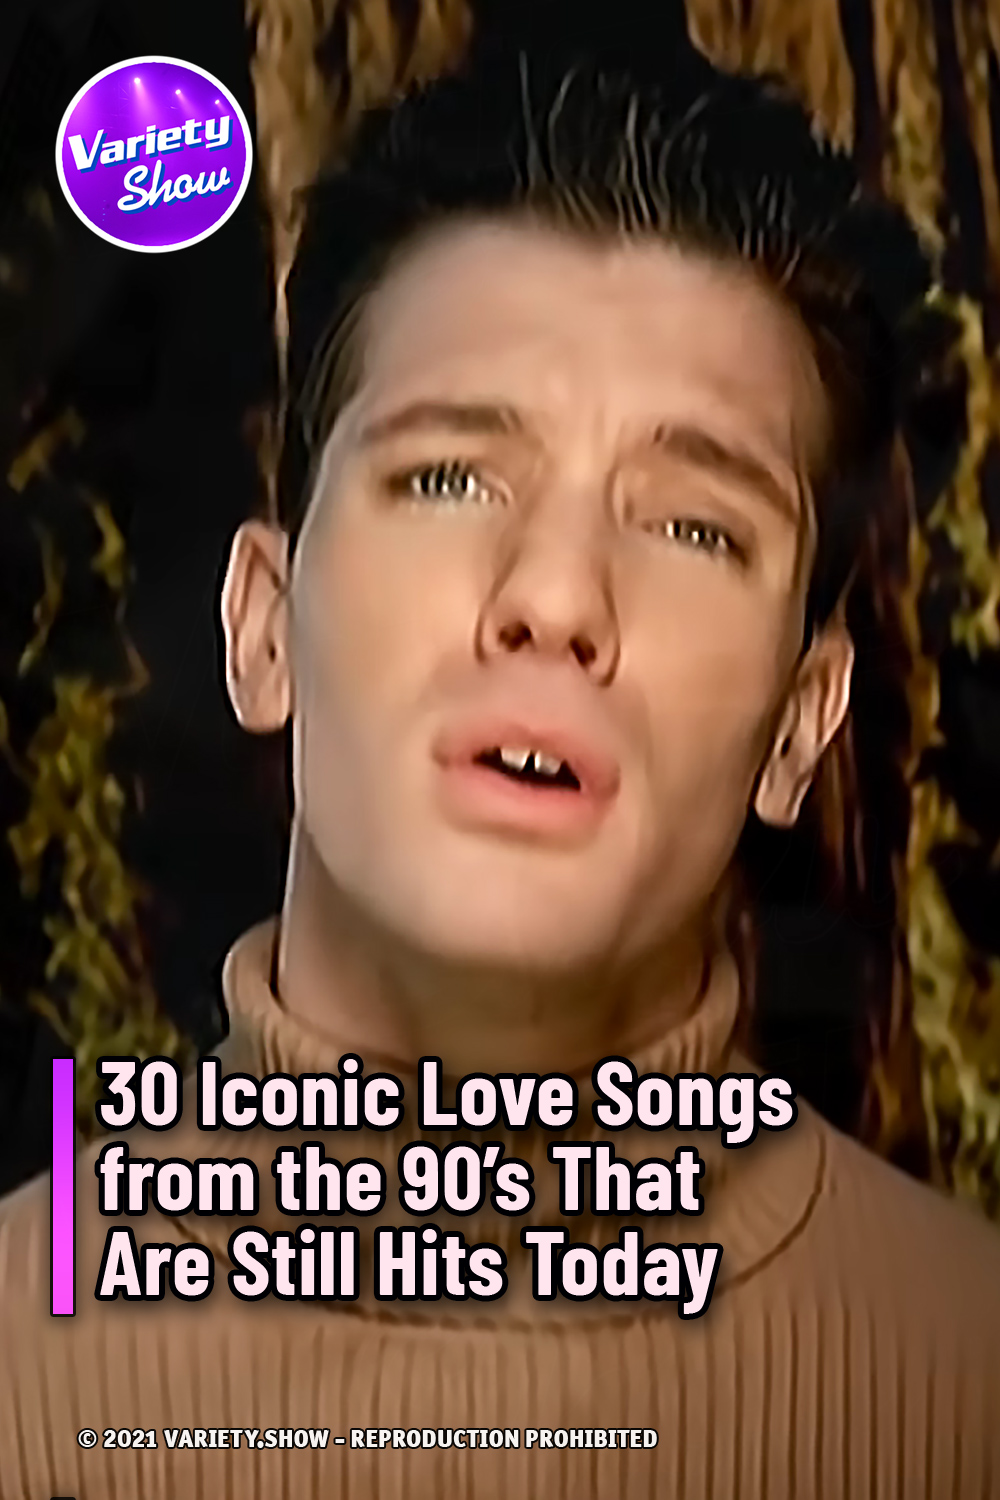 30 Iconic Love Songs from the 90’s That Are Still Hits Today